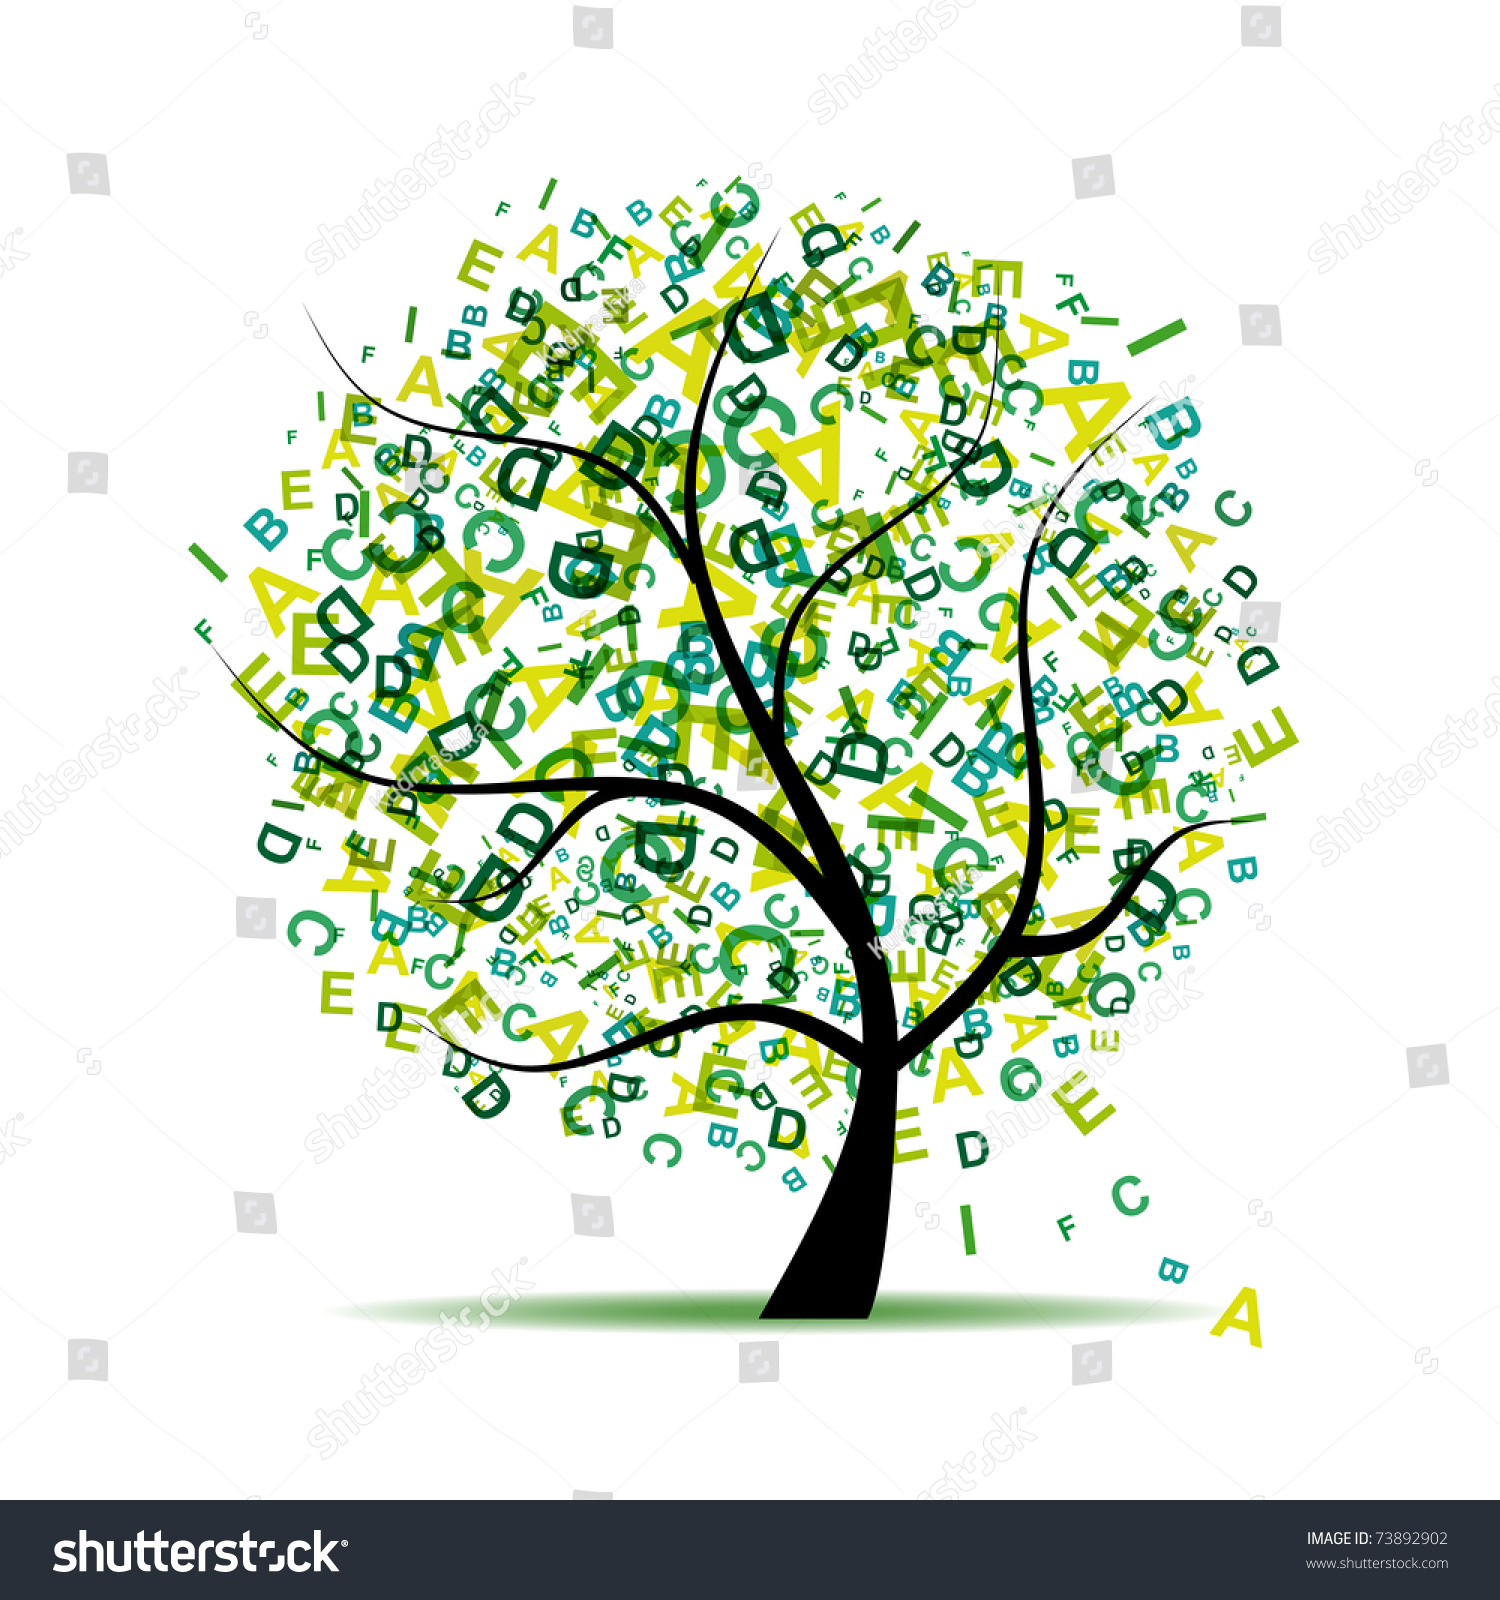 Art Tree With Letters Green For Your Design Stock Vector Illustration